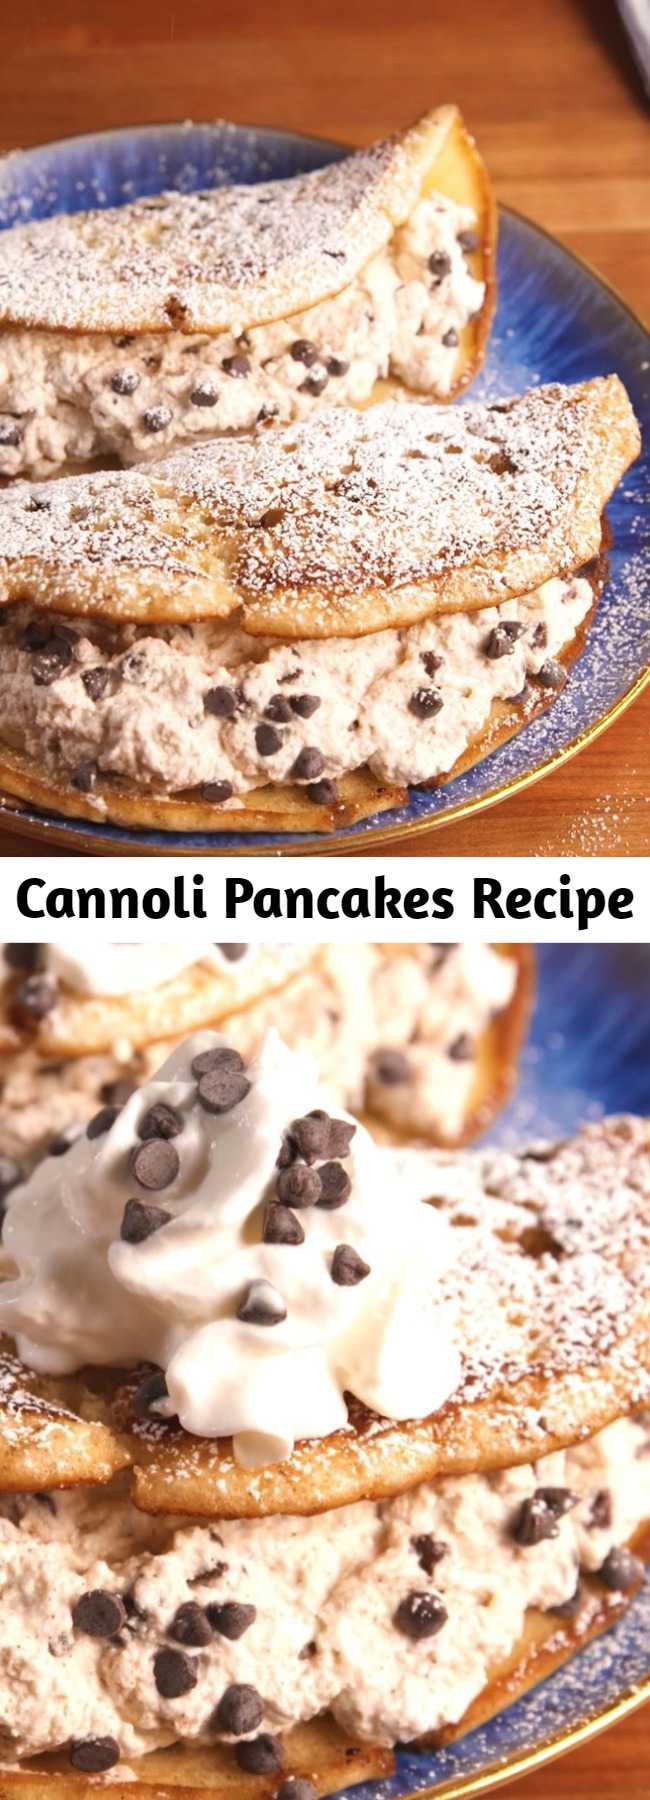 Cannoli Pancakes Recipe - This recipe is the key to getting your cannoli fix before 12 P.M. Dessert for breakfast >>> breakfast for dinner.